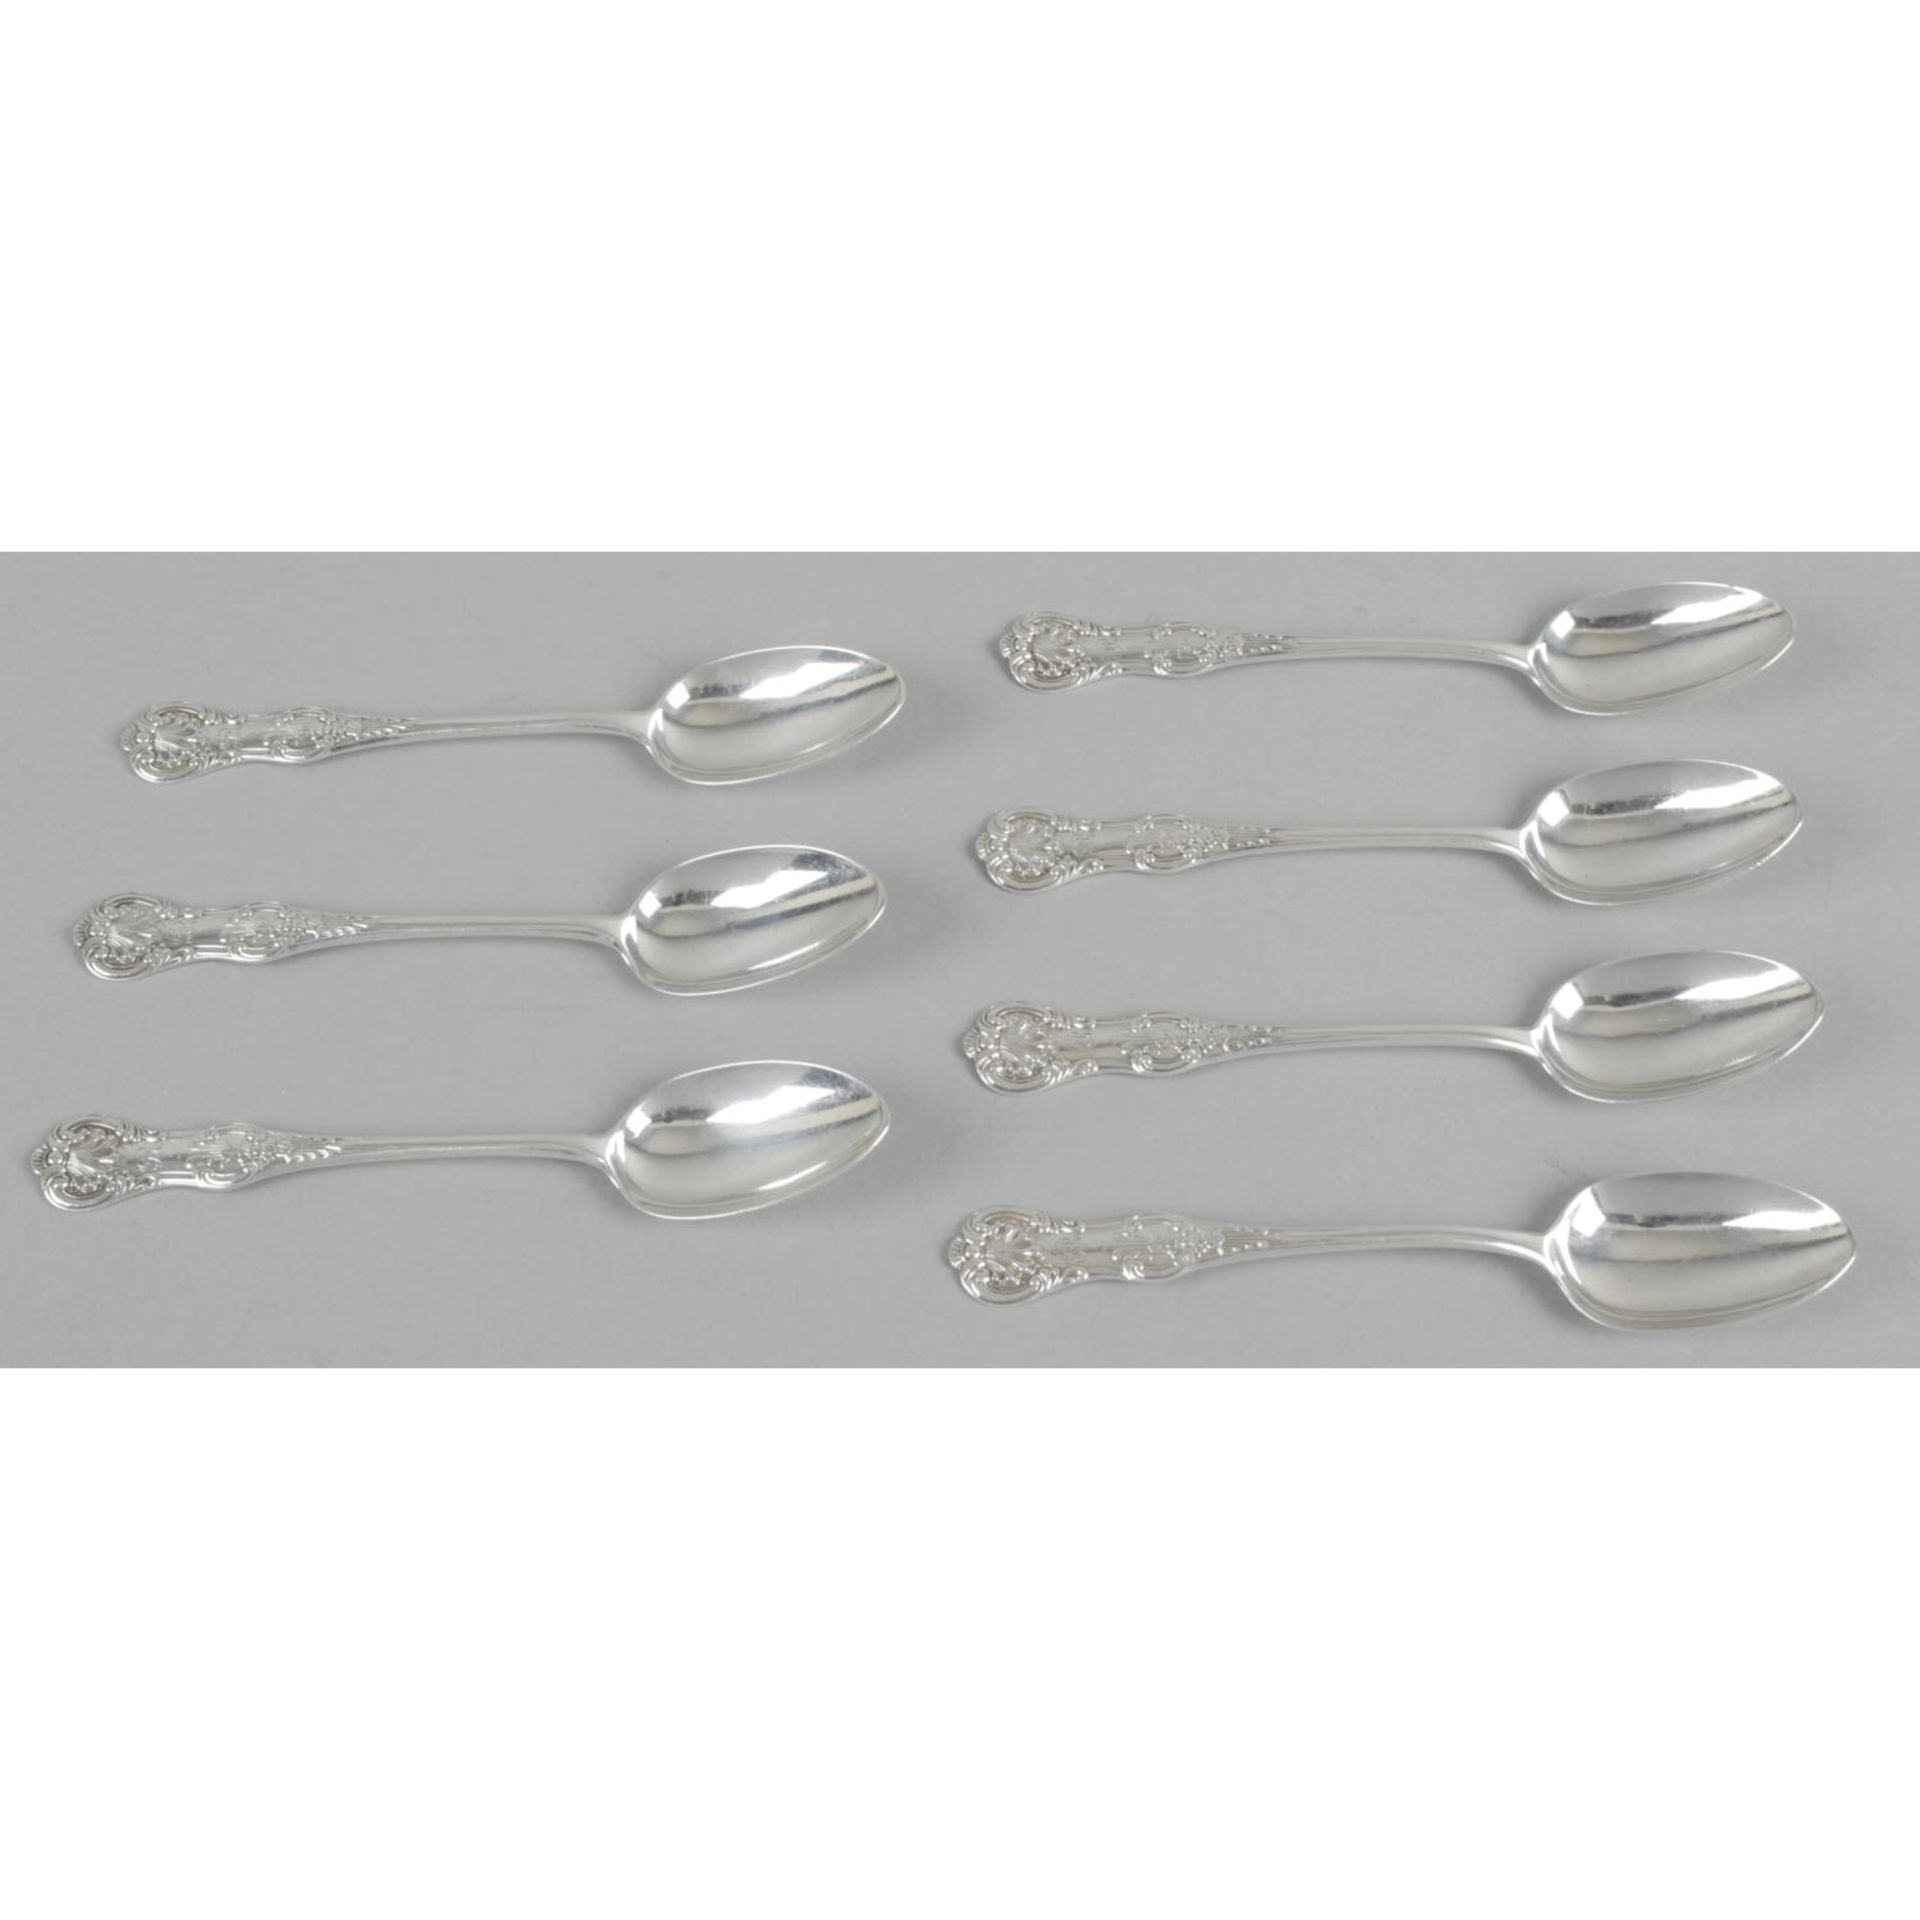 Seven Victorian Scottish silver teaspoons, in Queen's pattern, with initial engraved terminal.